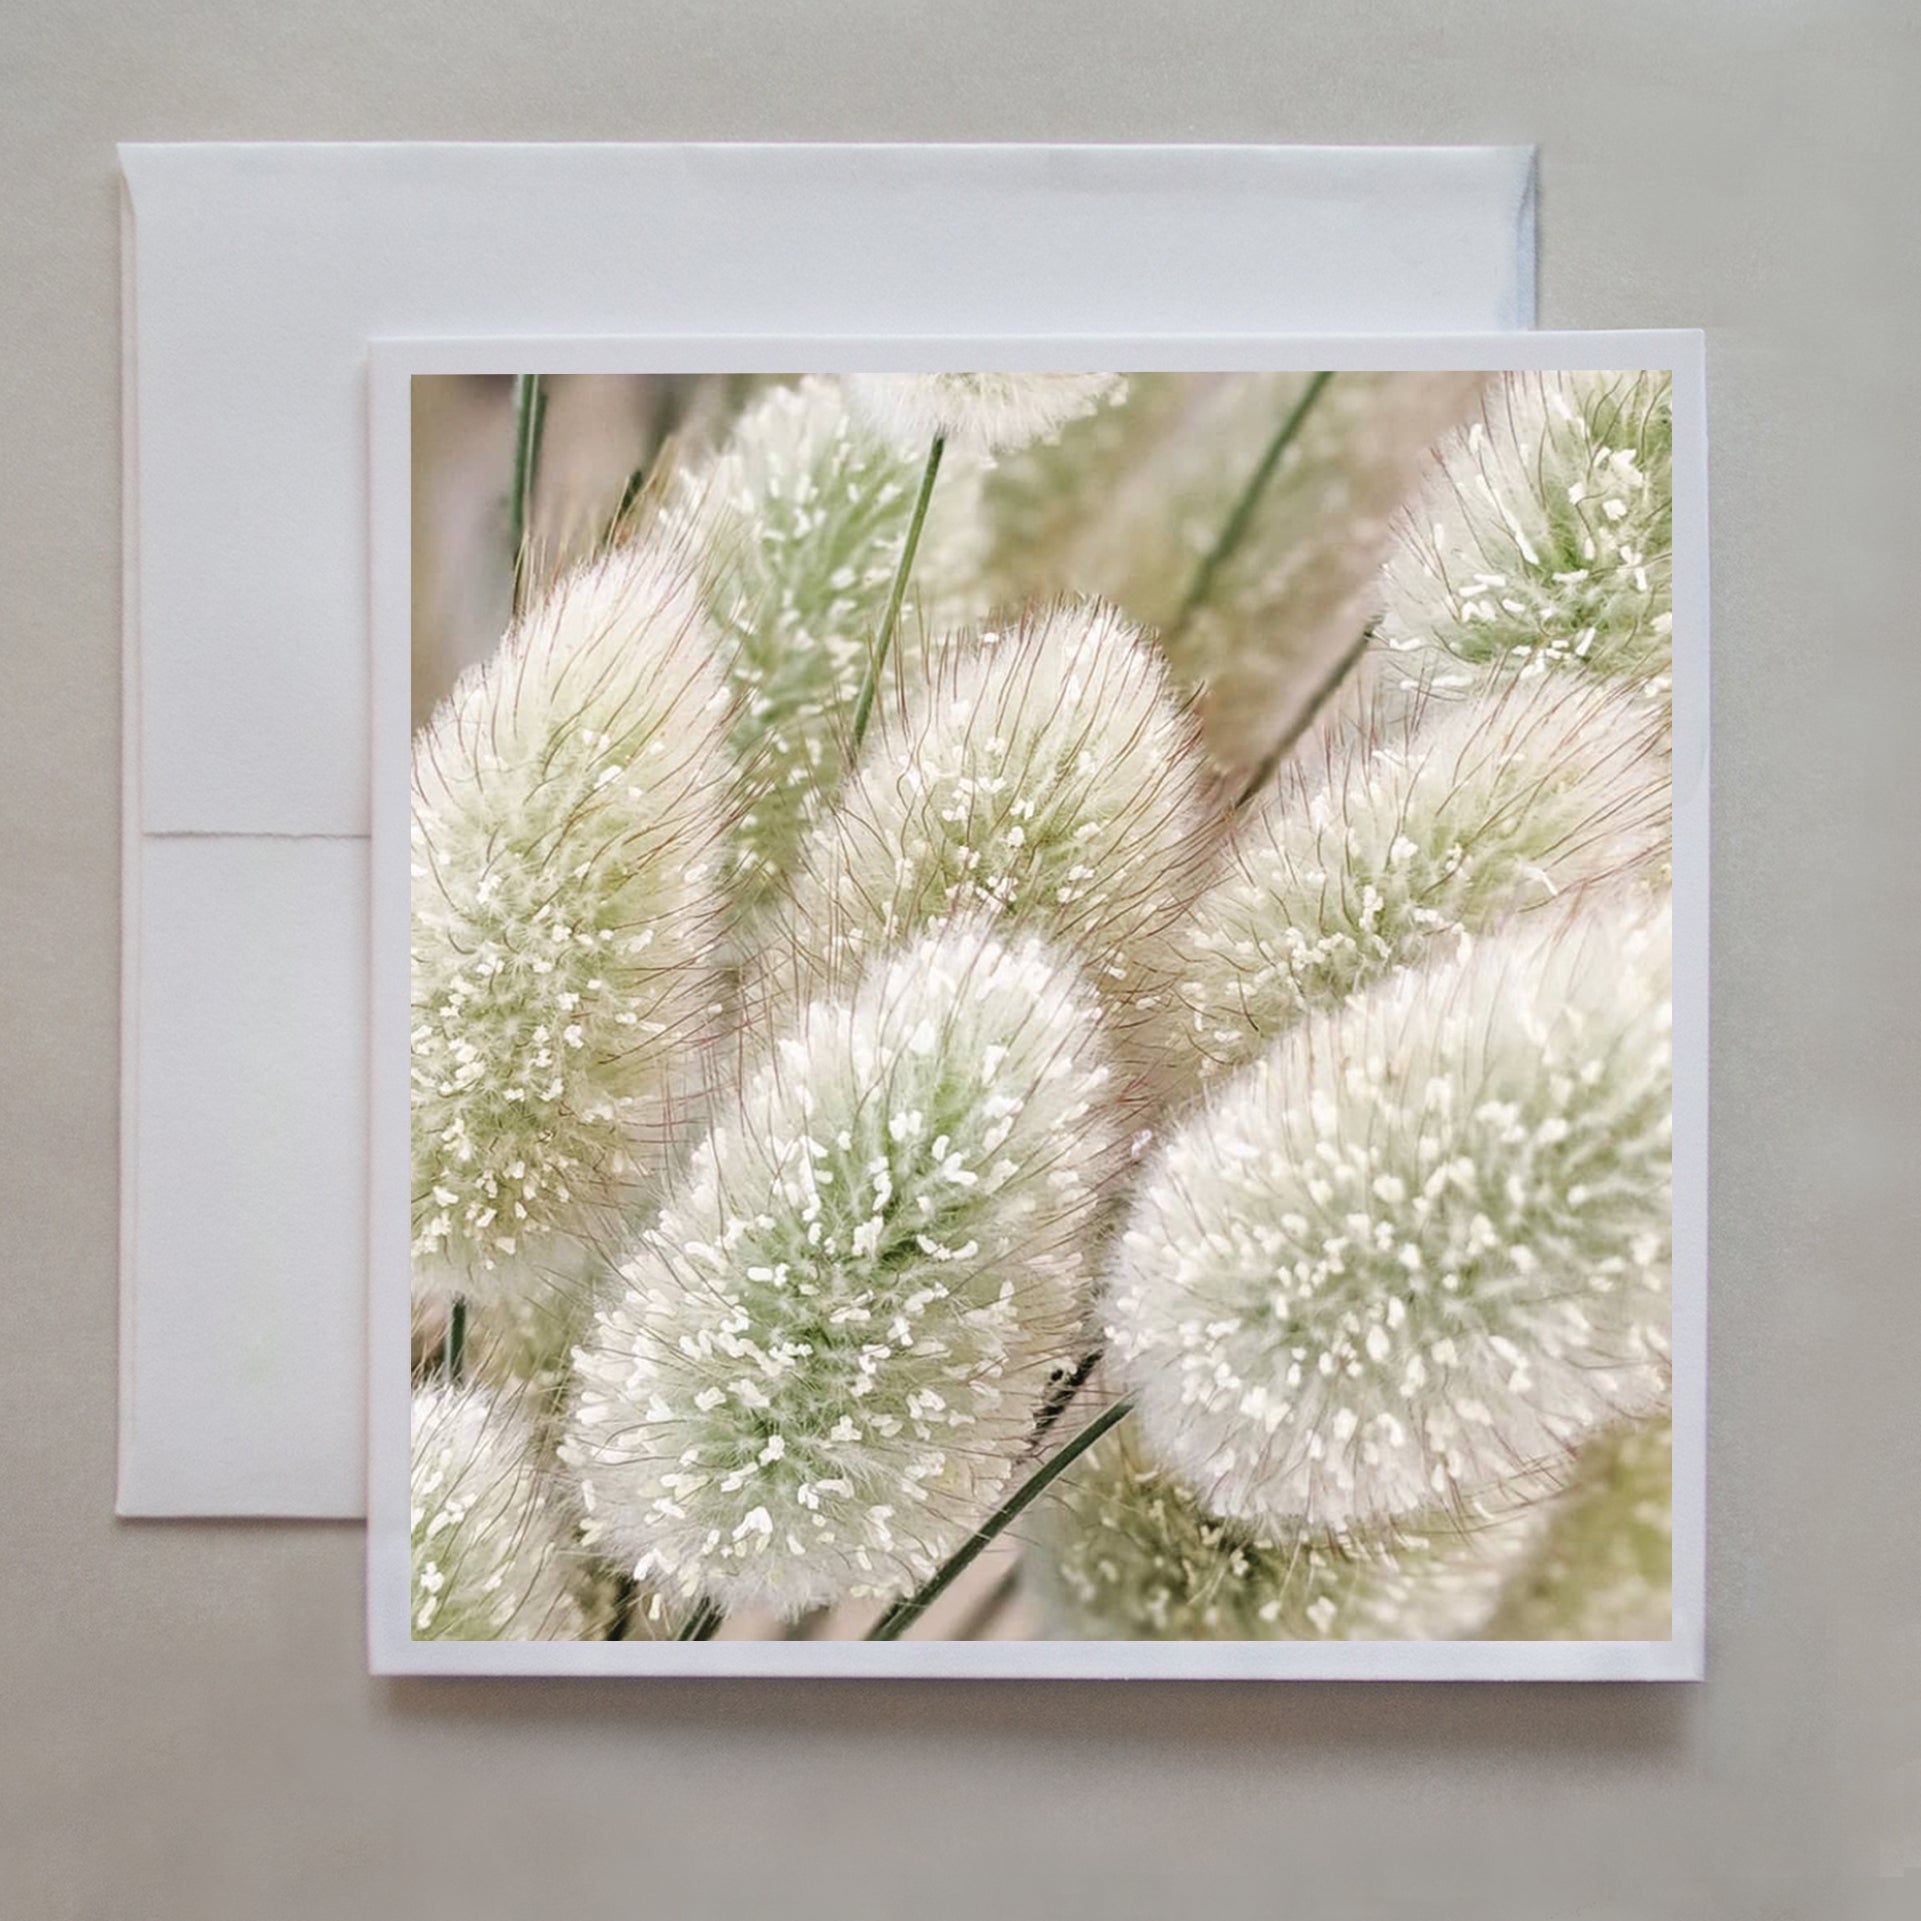 This photo greeting card is a detail shot of the soft, fluffy flower of the bunny tail grass by photographer Jennifer Echols.